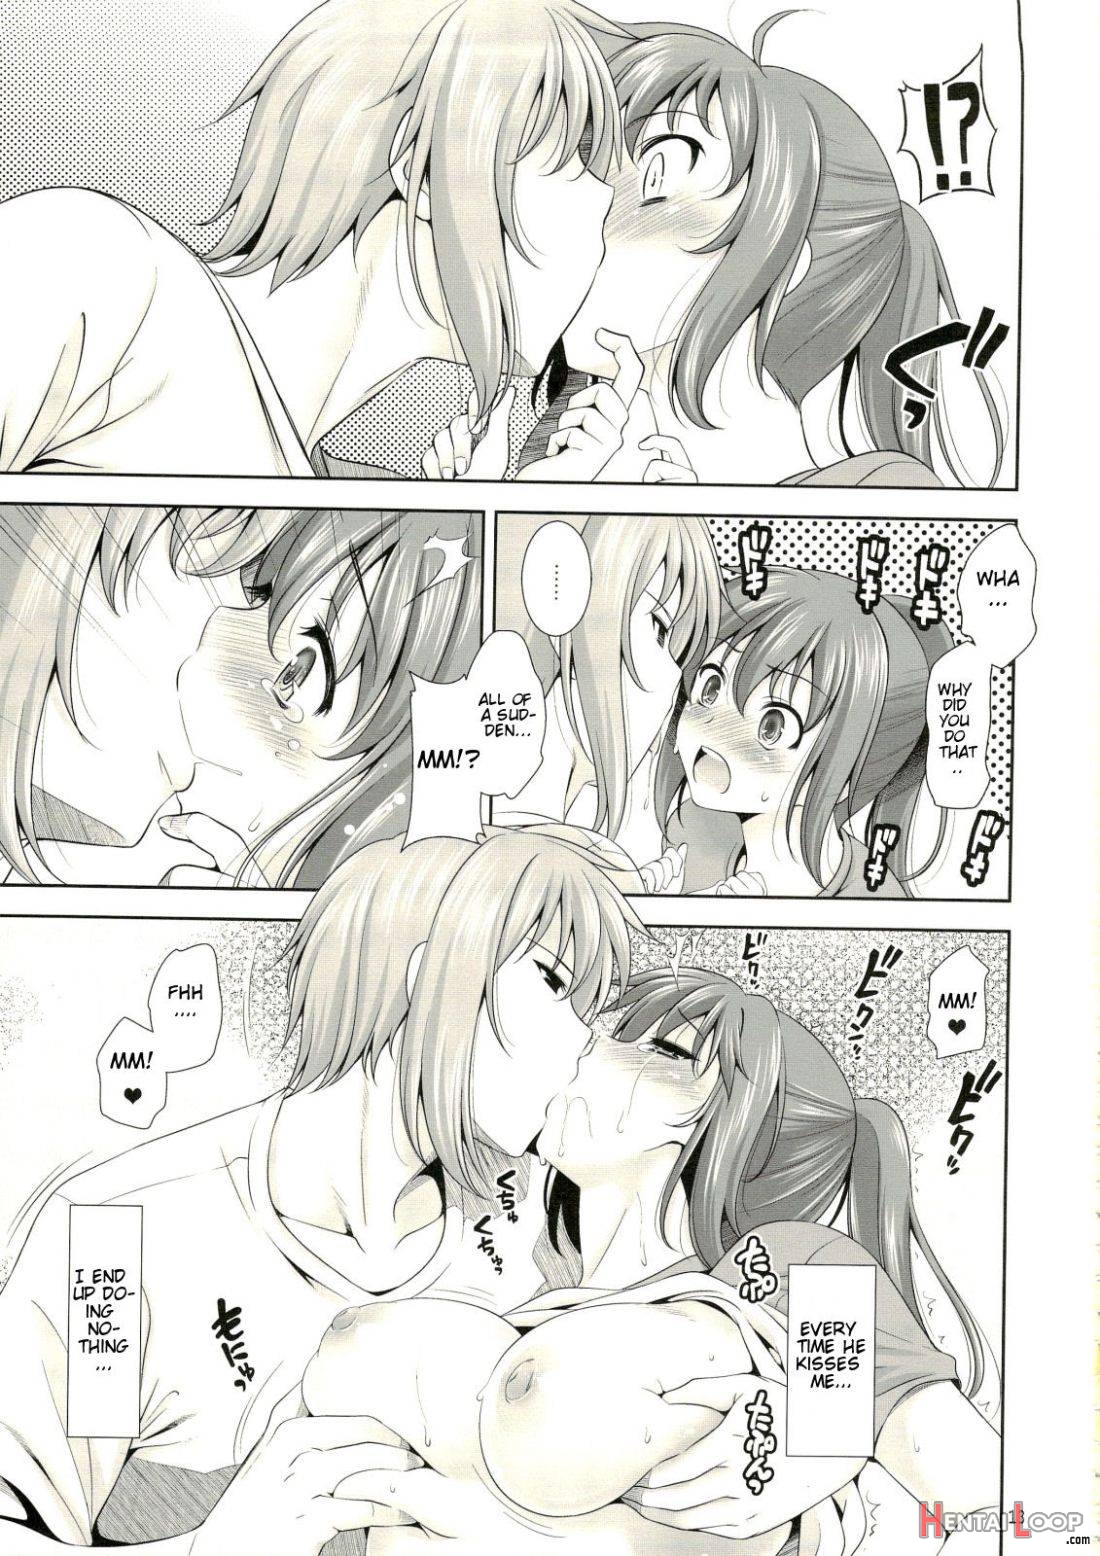 Manatsu no Yo no Yume no Mata Yume no Mata Yume page 10